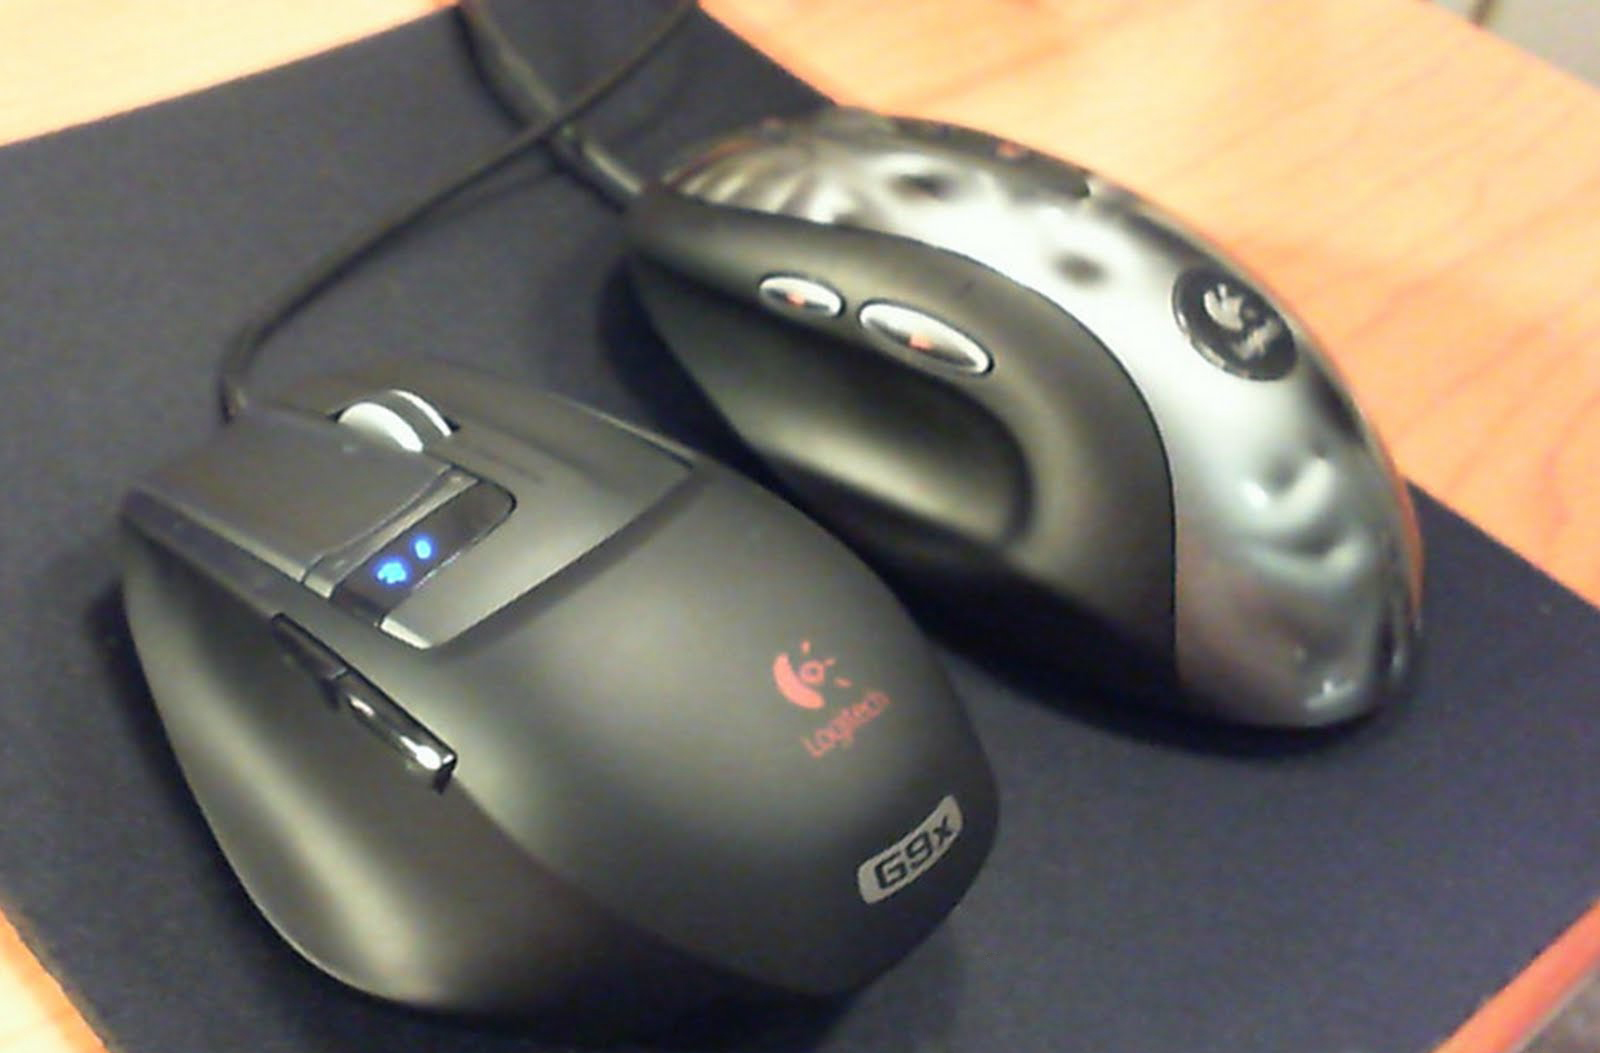 Apoctv Review Logitech G9x Essential Mouse Info For Gamers